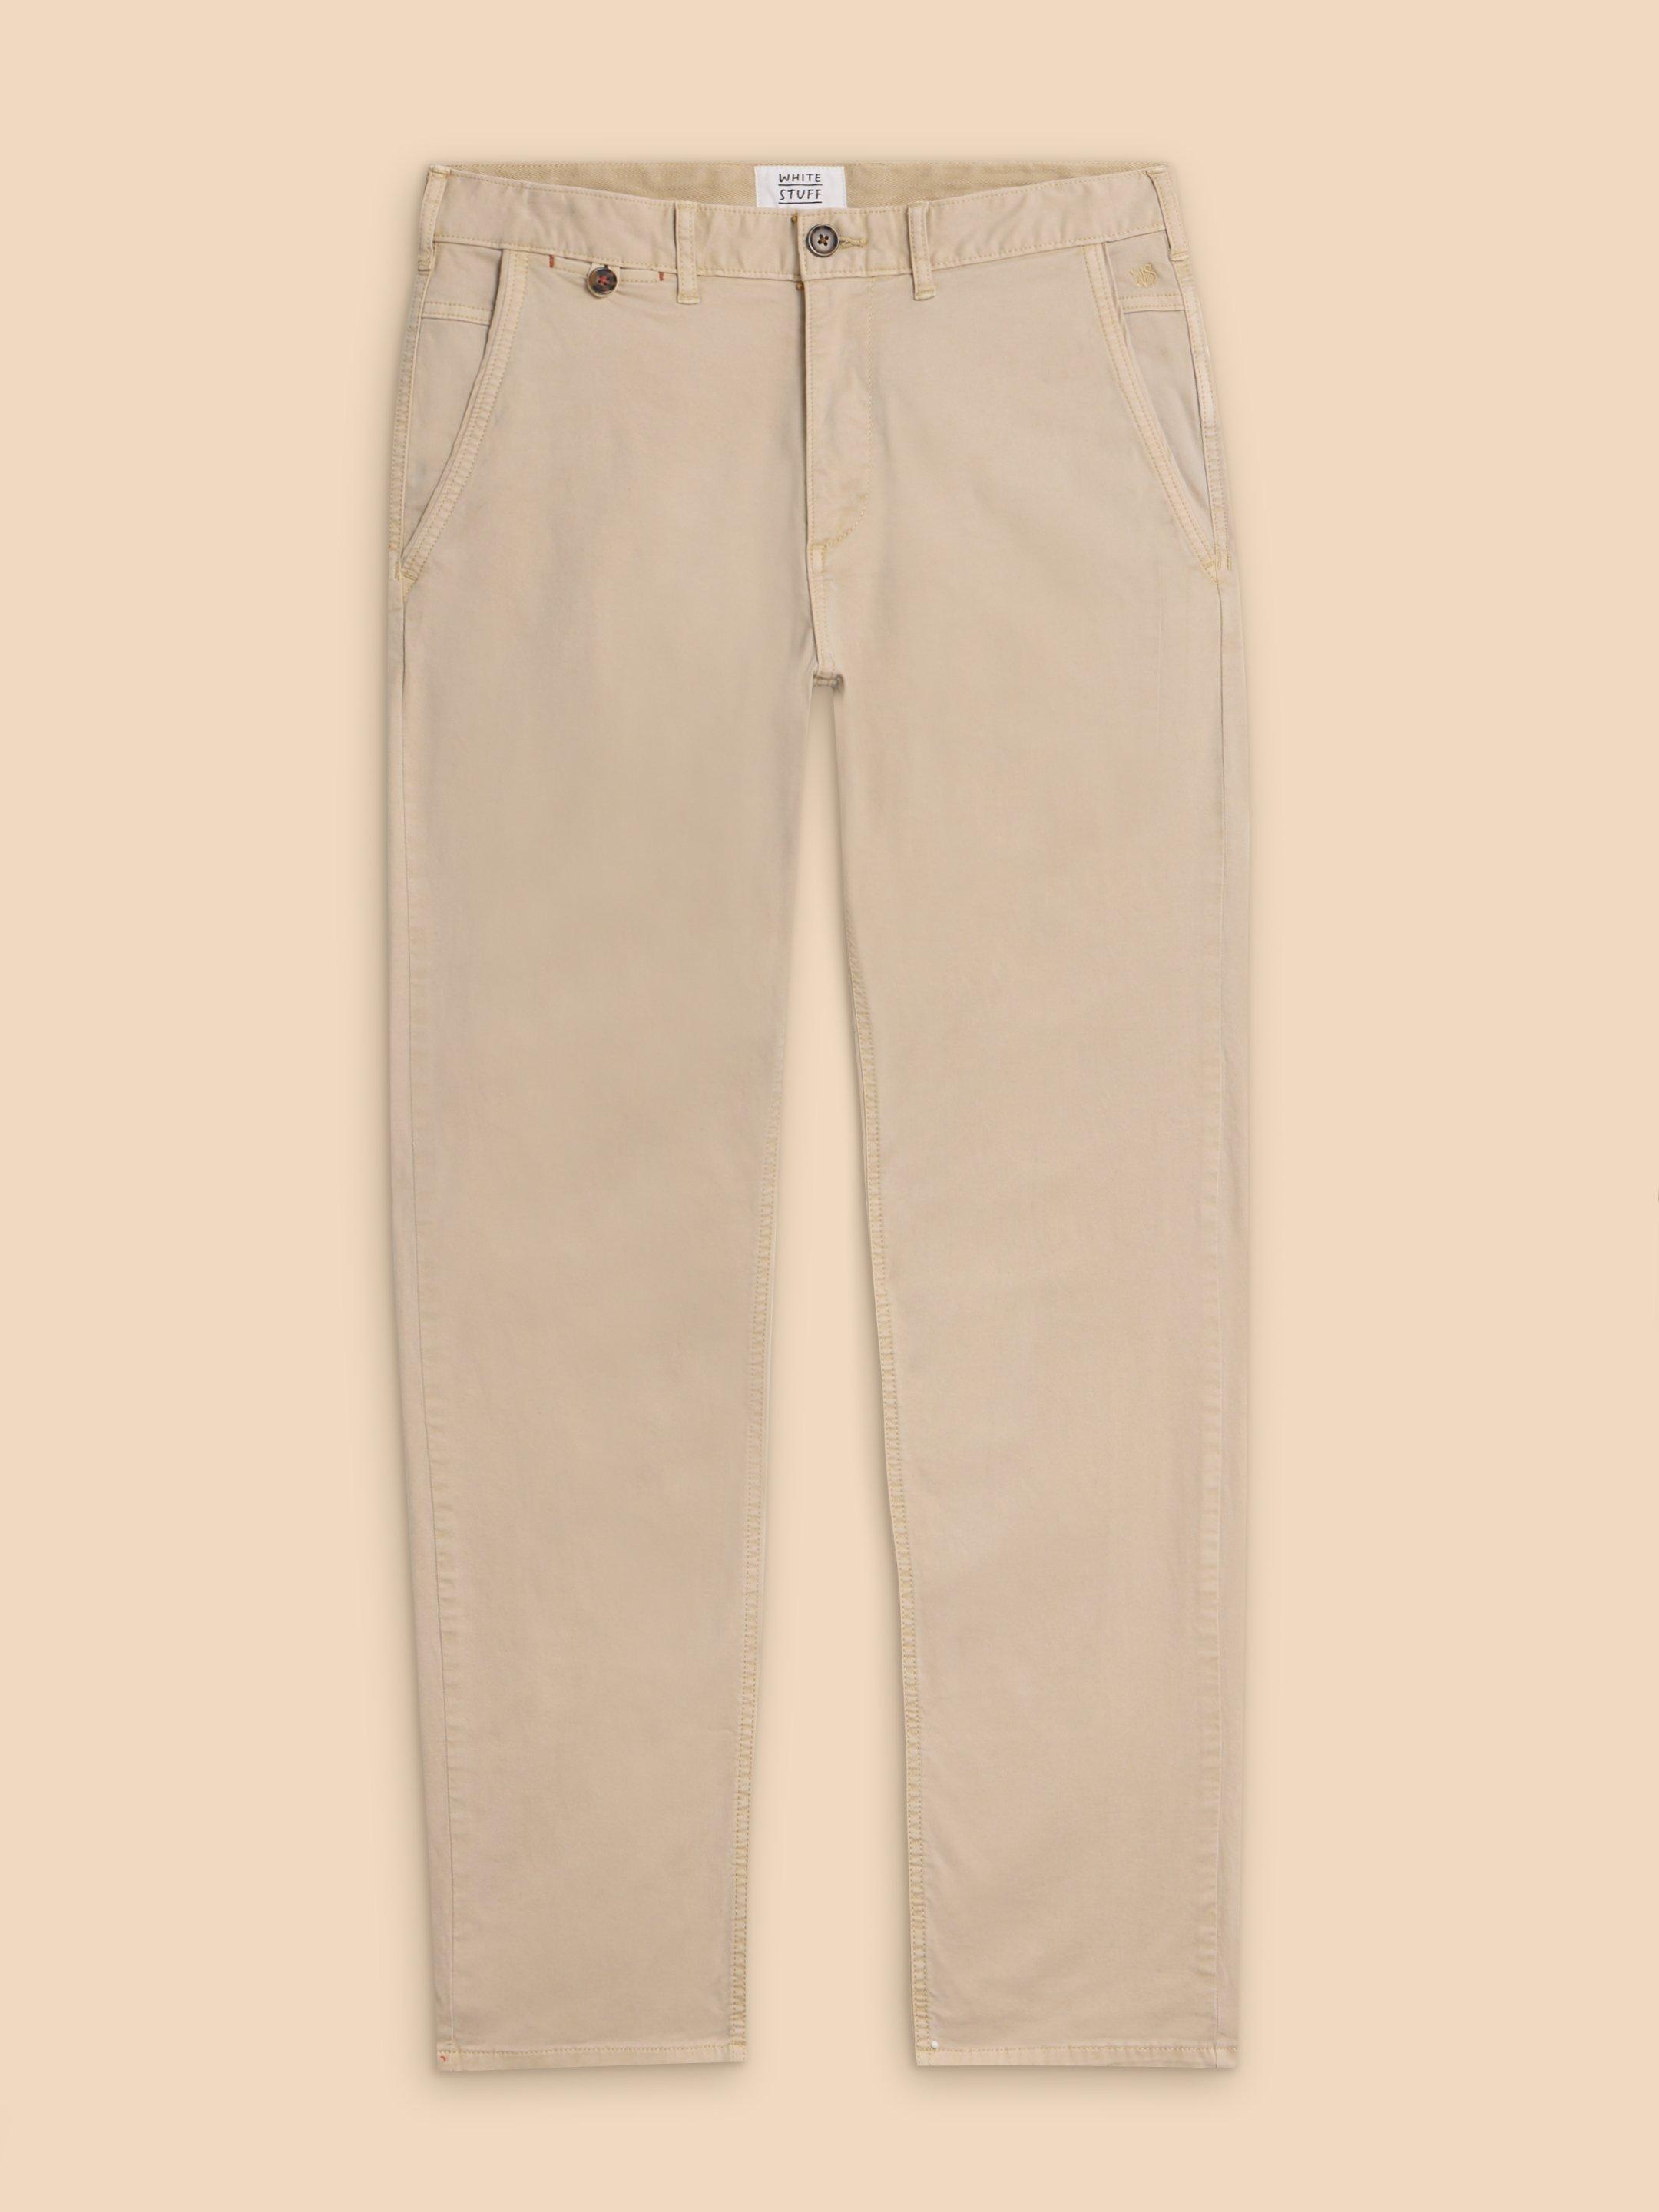 Sutton Organic Chino Trouser in LGT NAT - FLAT FRONT